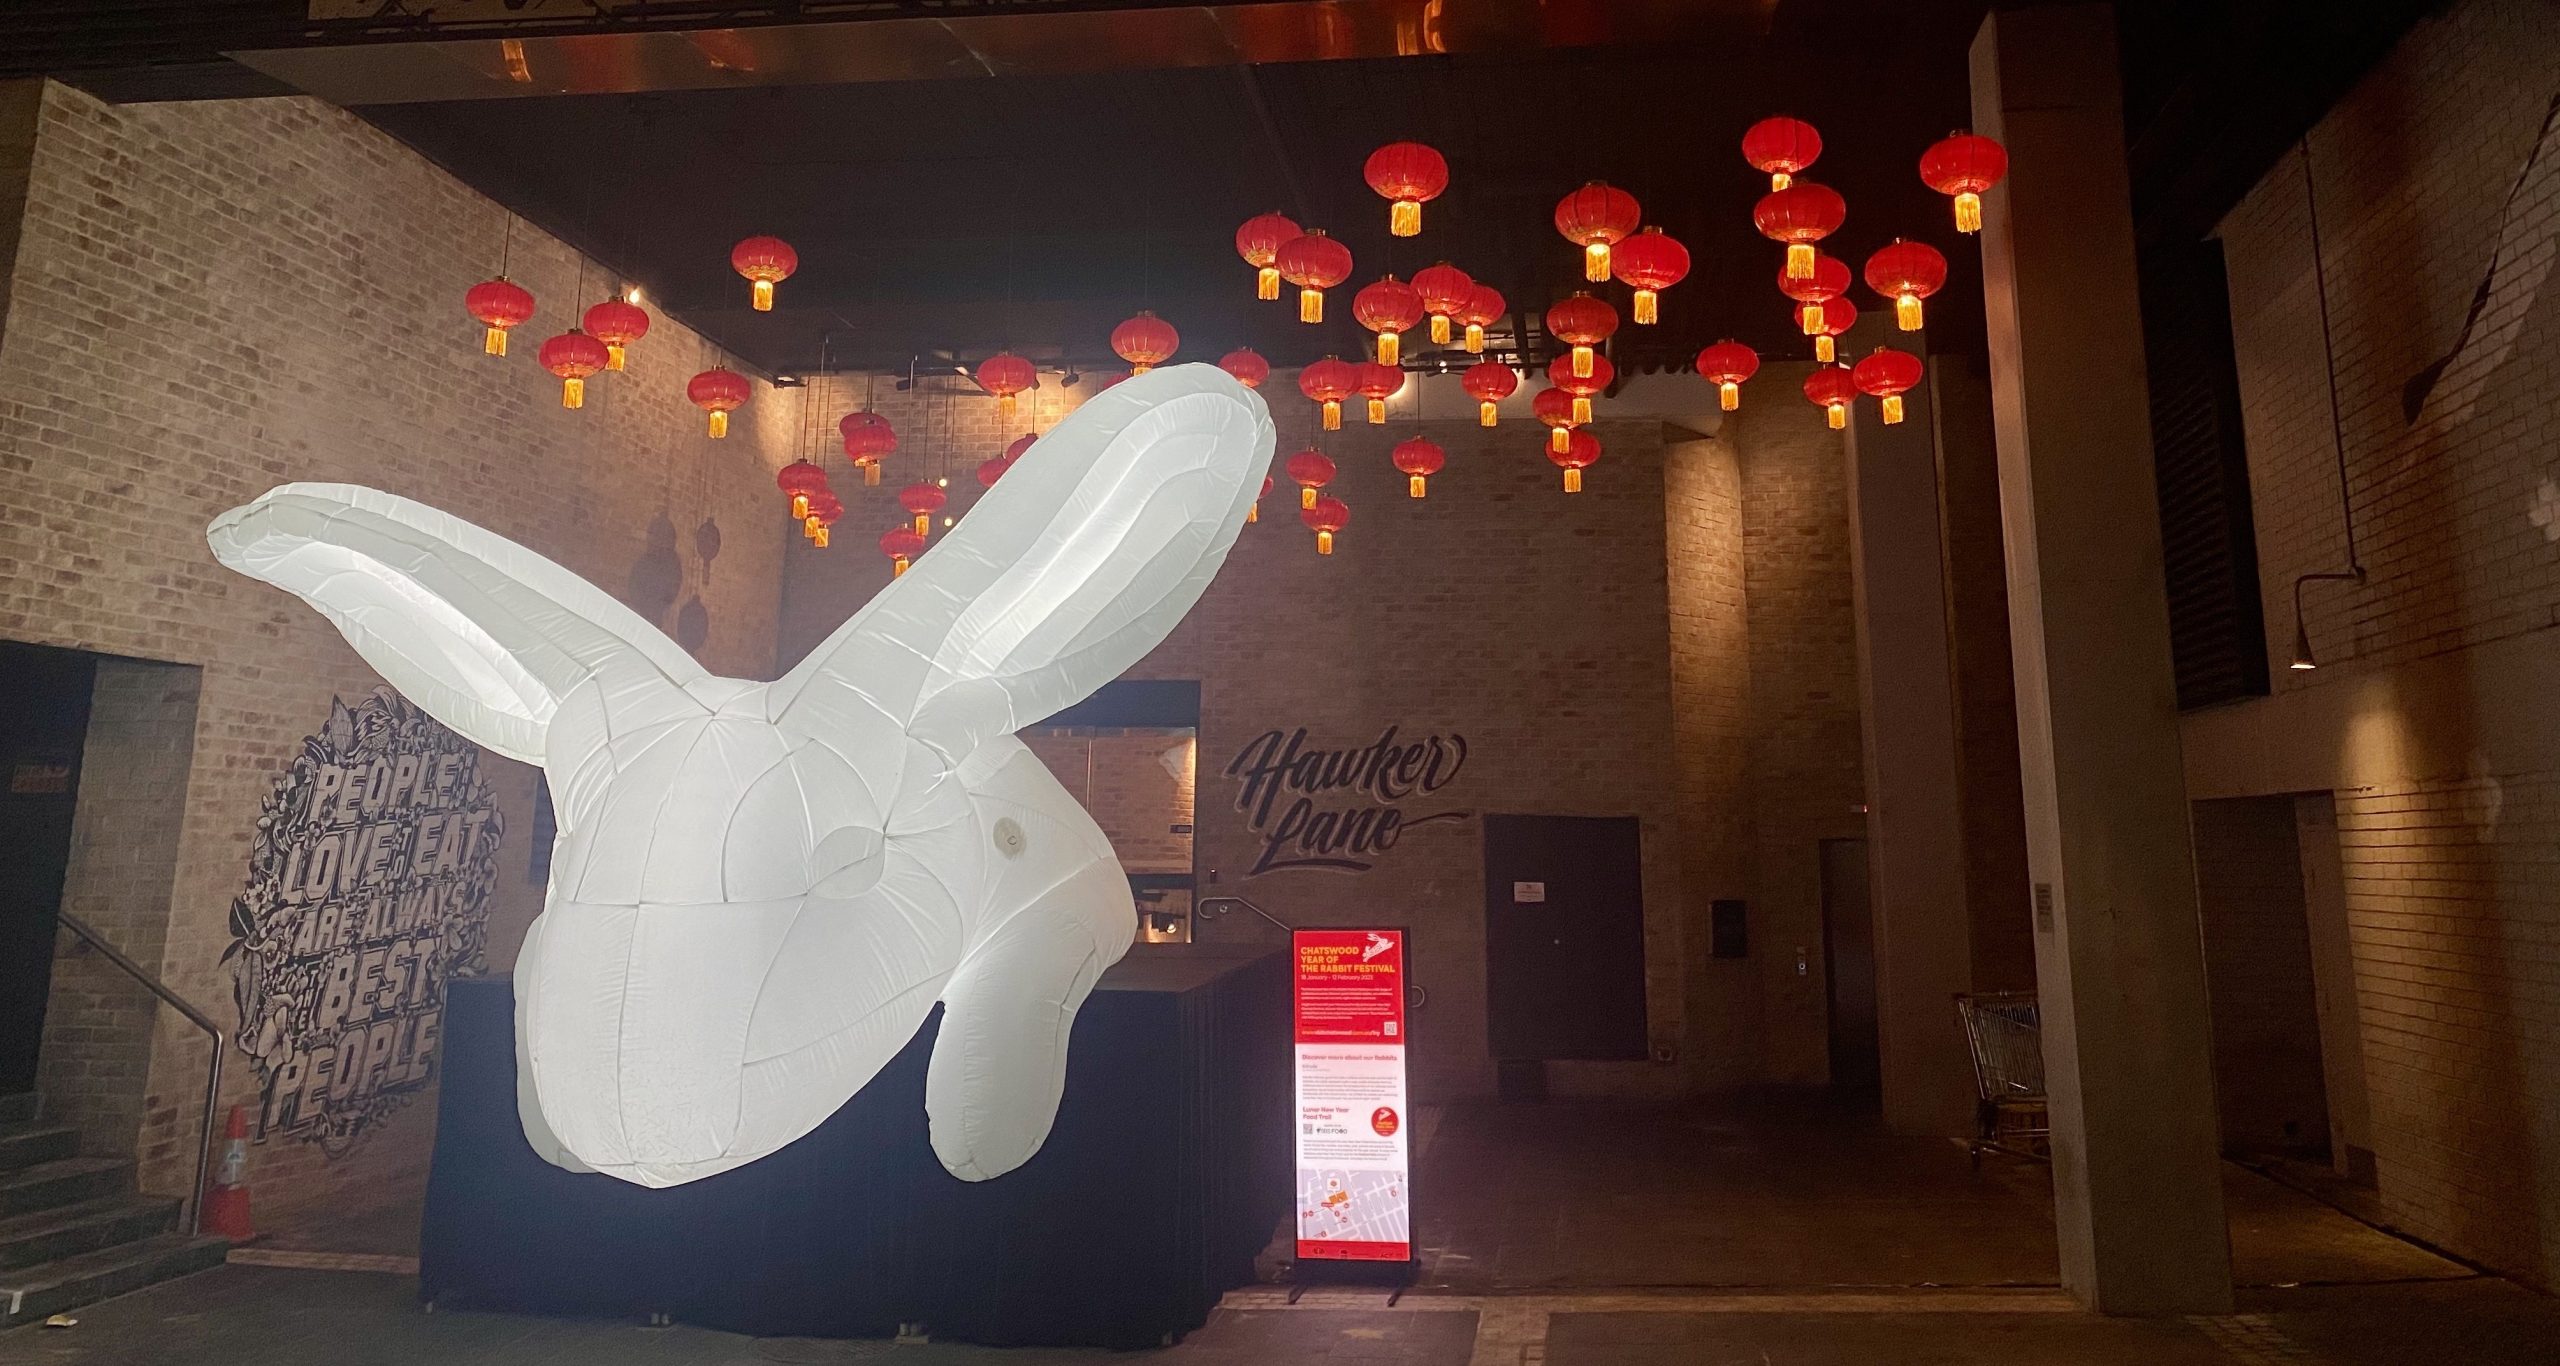 Westfield Chatswood Lunar New Year 2023. Giant Inflatable rabbit or bunny with hanging lanterns LNY. Custom made and manufactured inn Australia